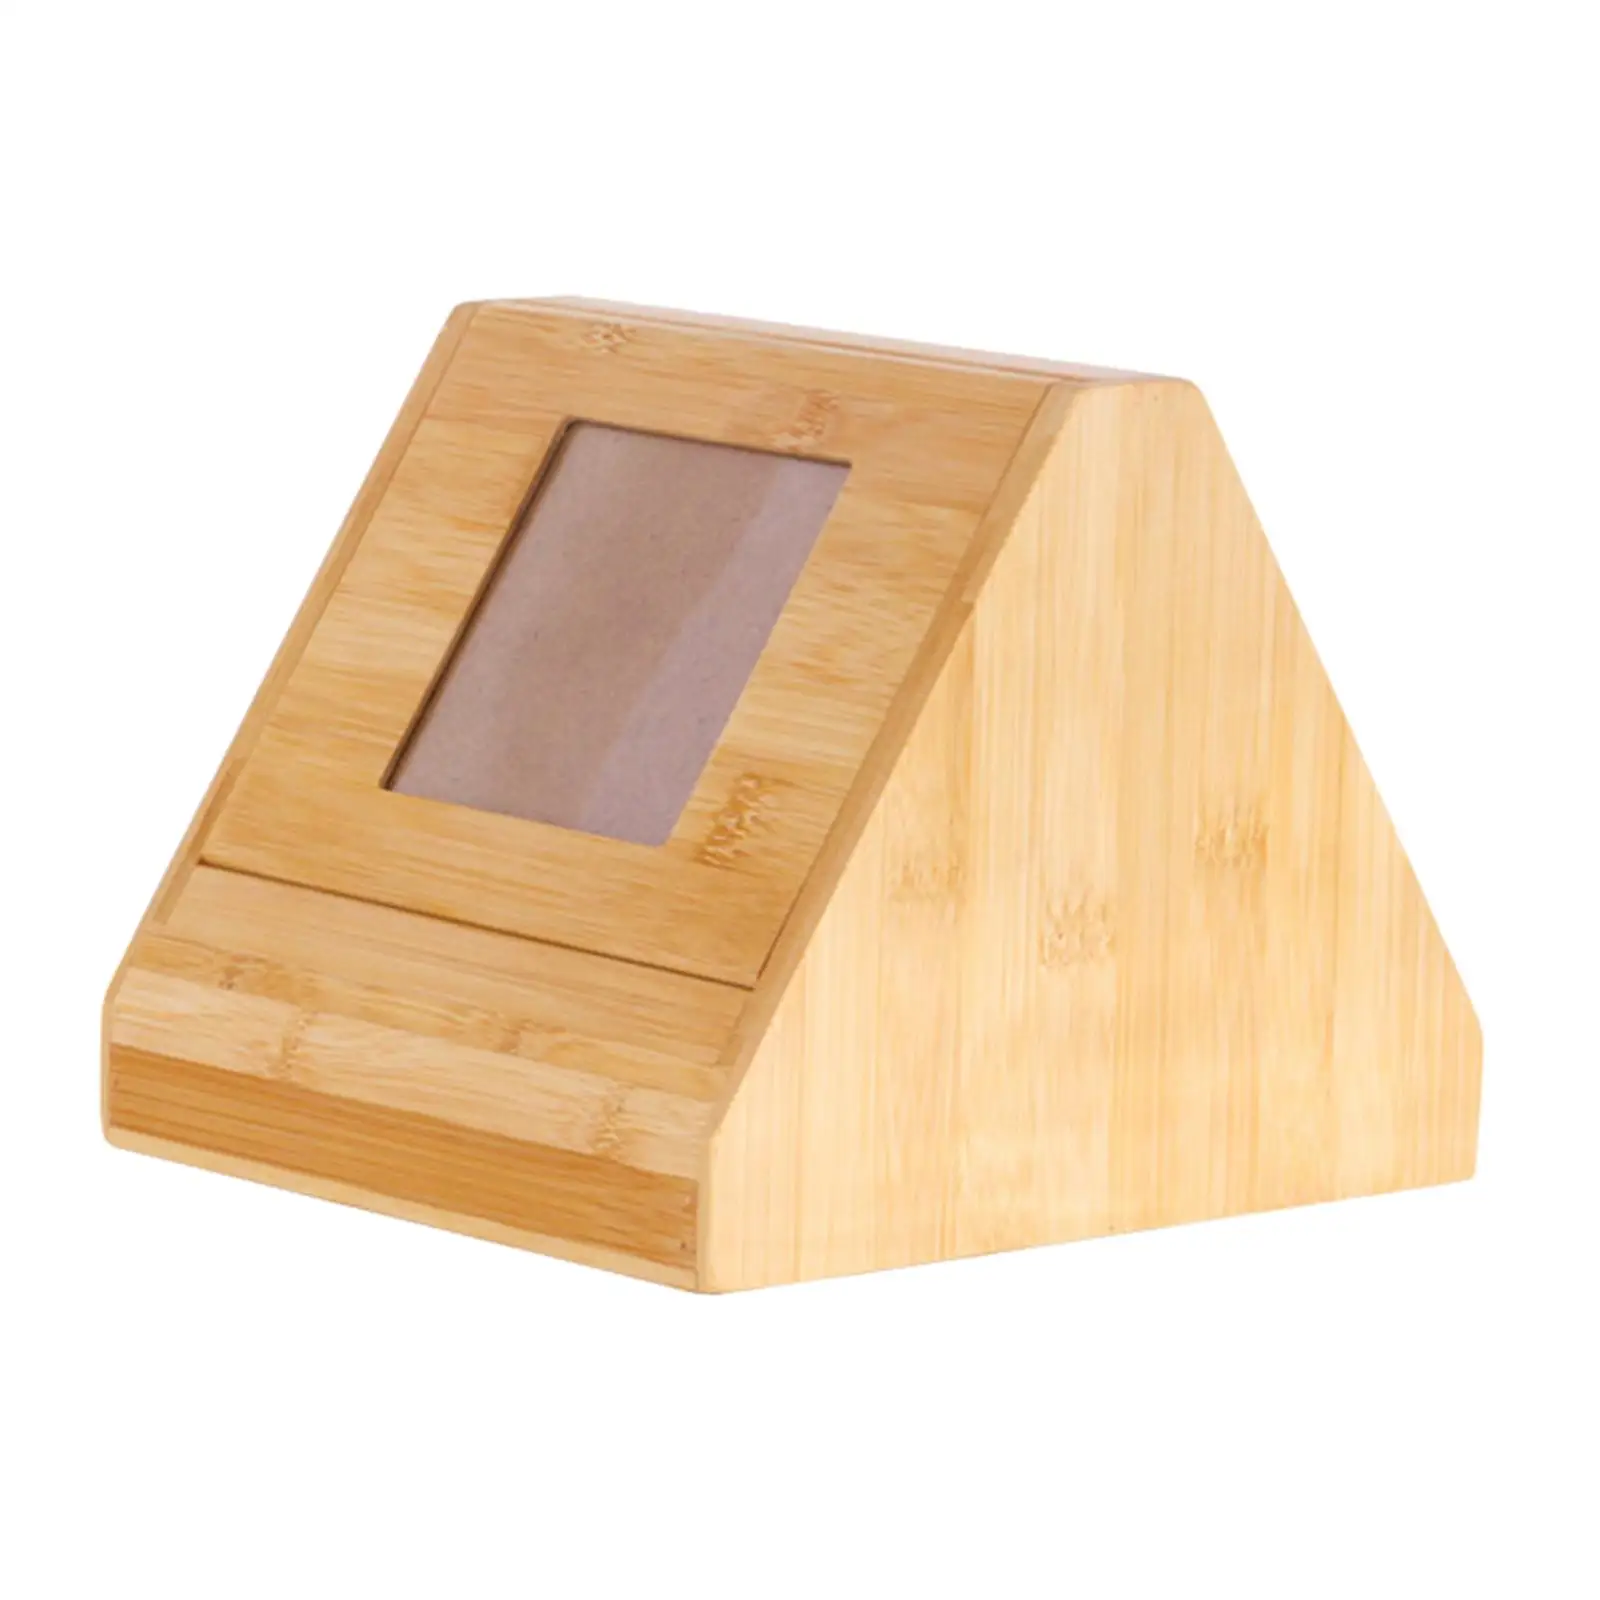 Pet Memorial Urn Cremation Urn for Pets Bamboo Memory Boxes Funerary Casket